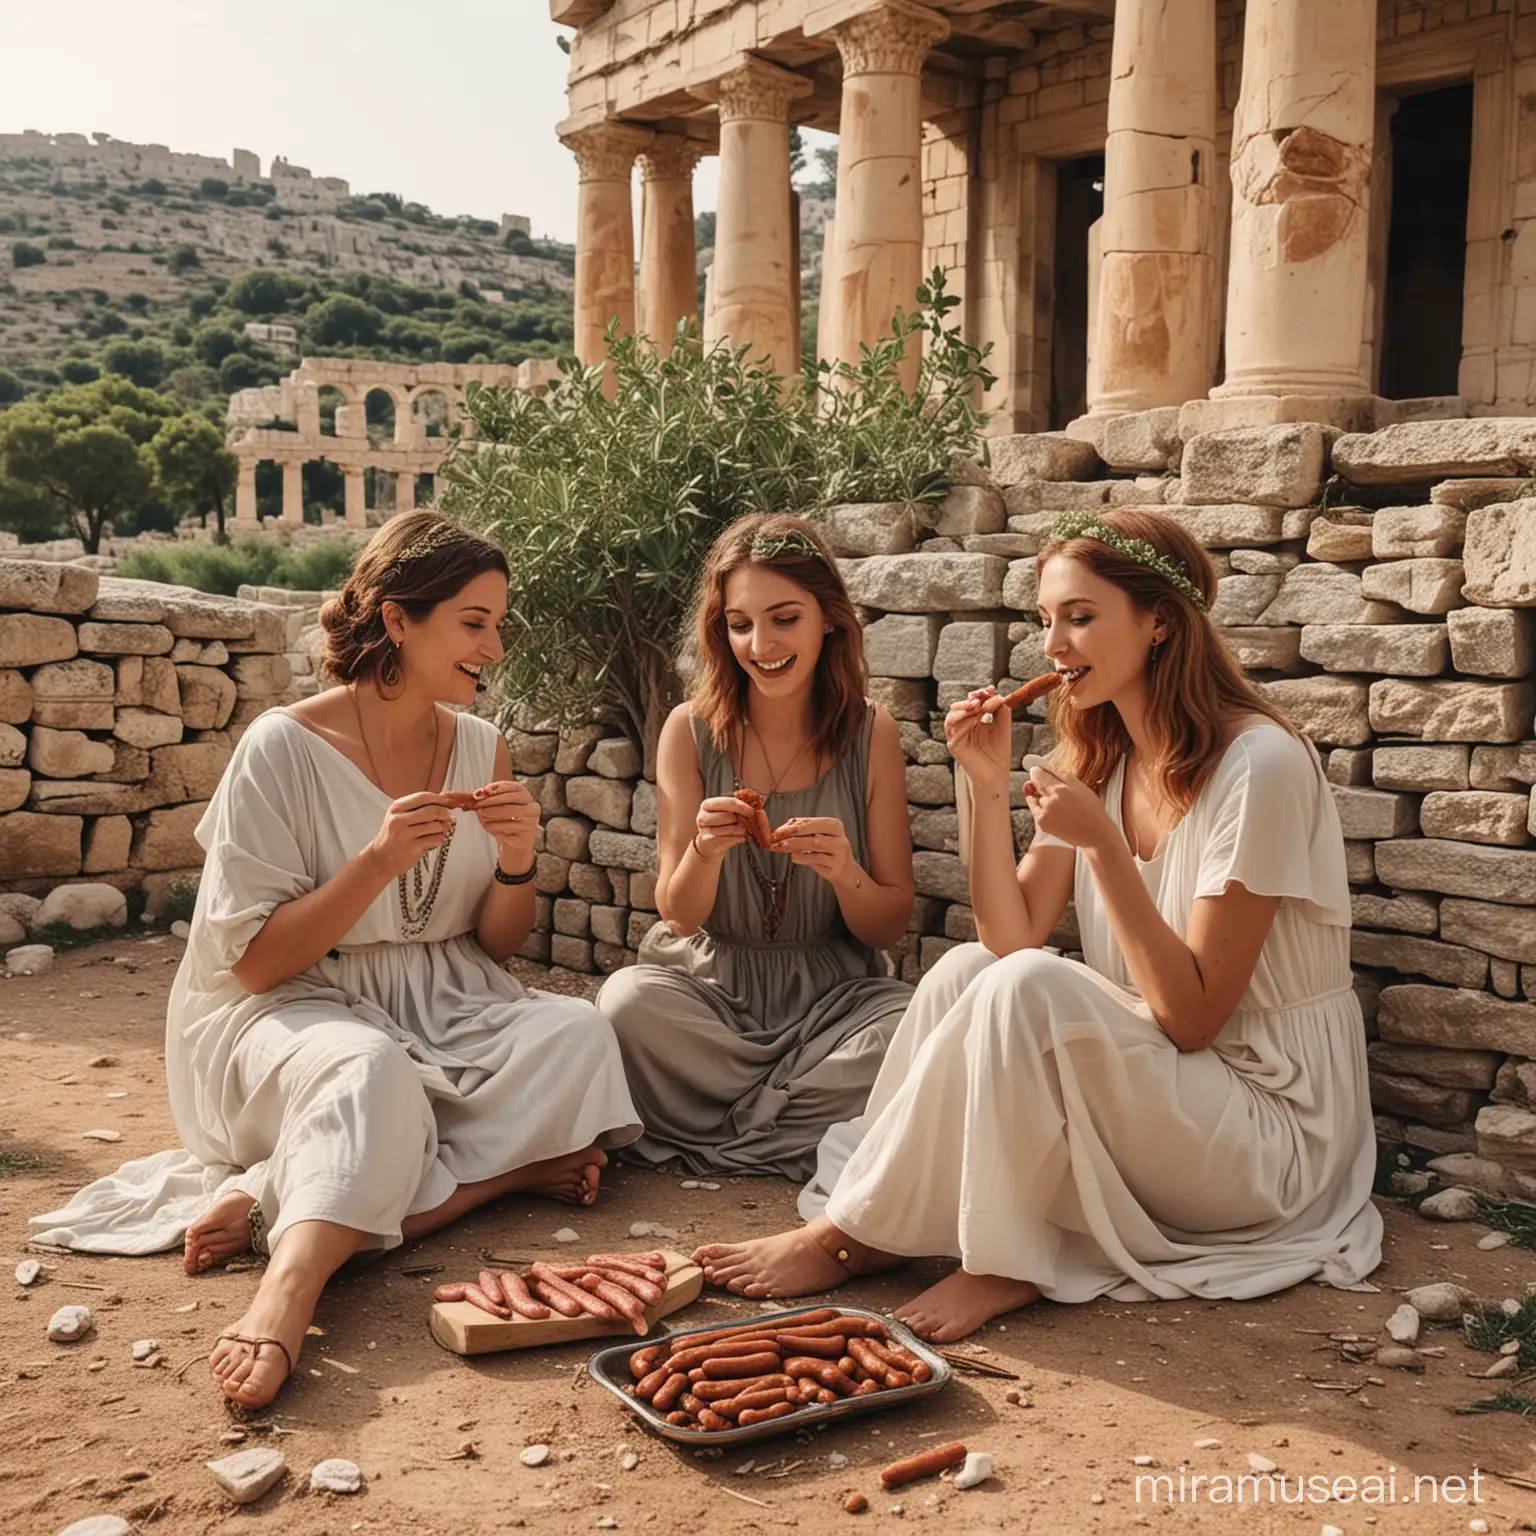 Tree French ladies eating sausages in ancient Greek ruins while making henna

